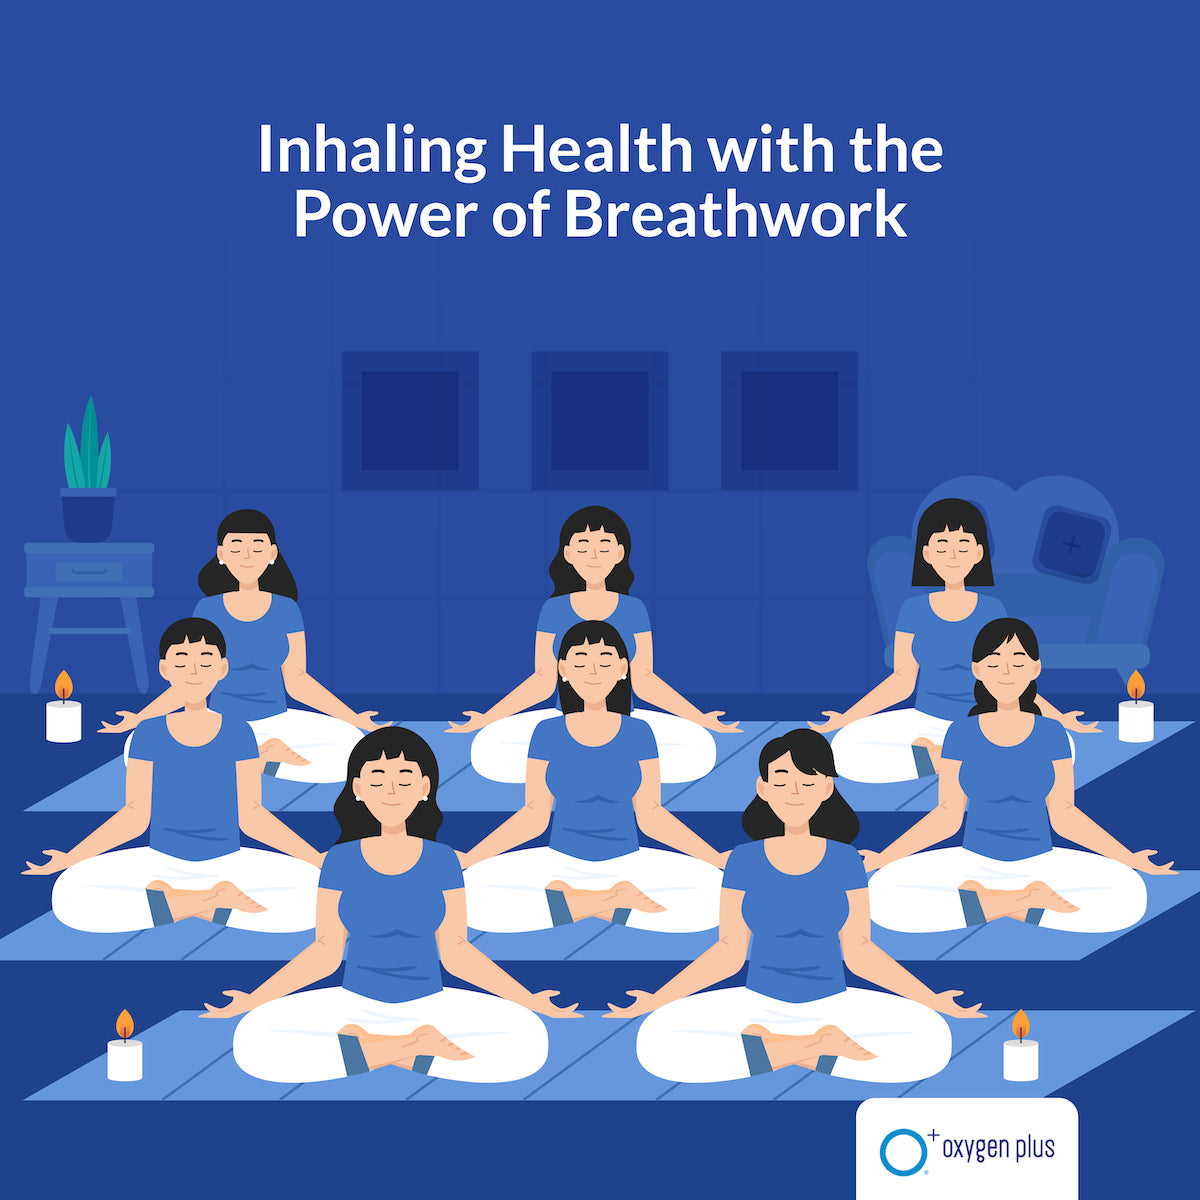 Inhaling health with the power of breathwork